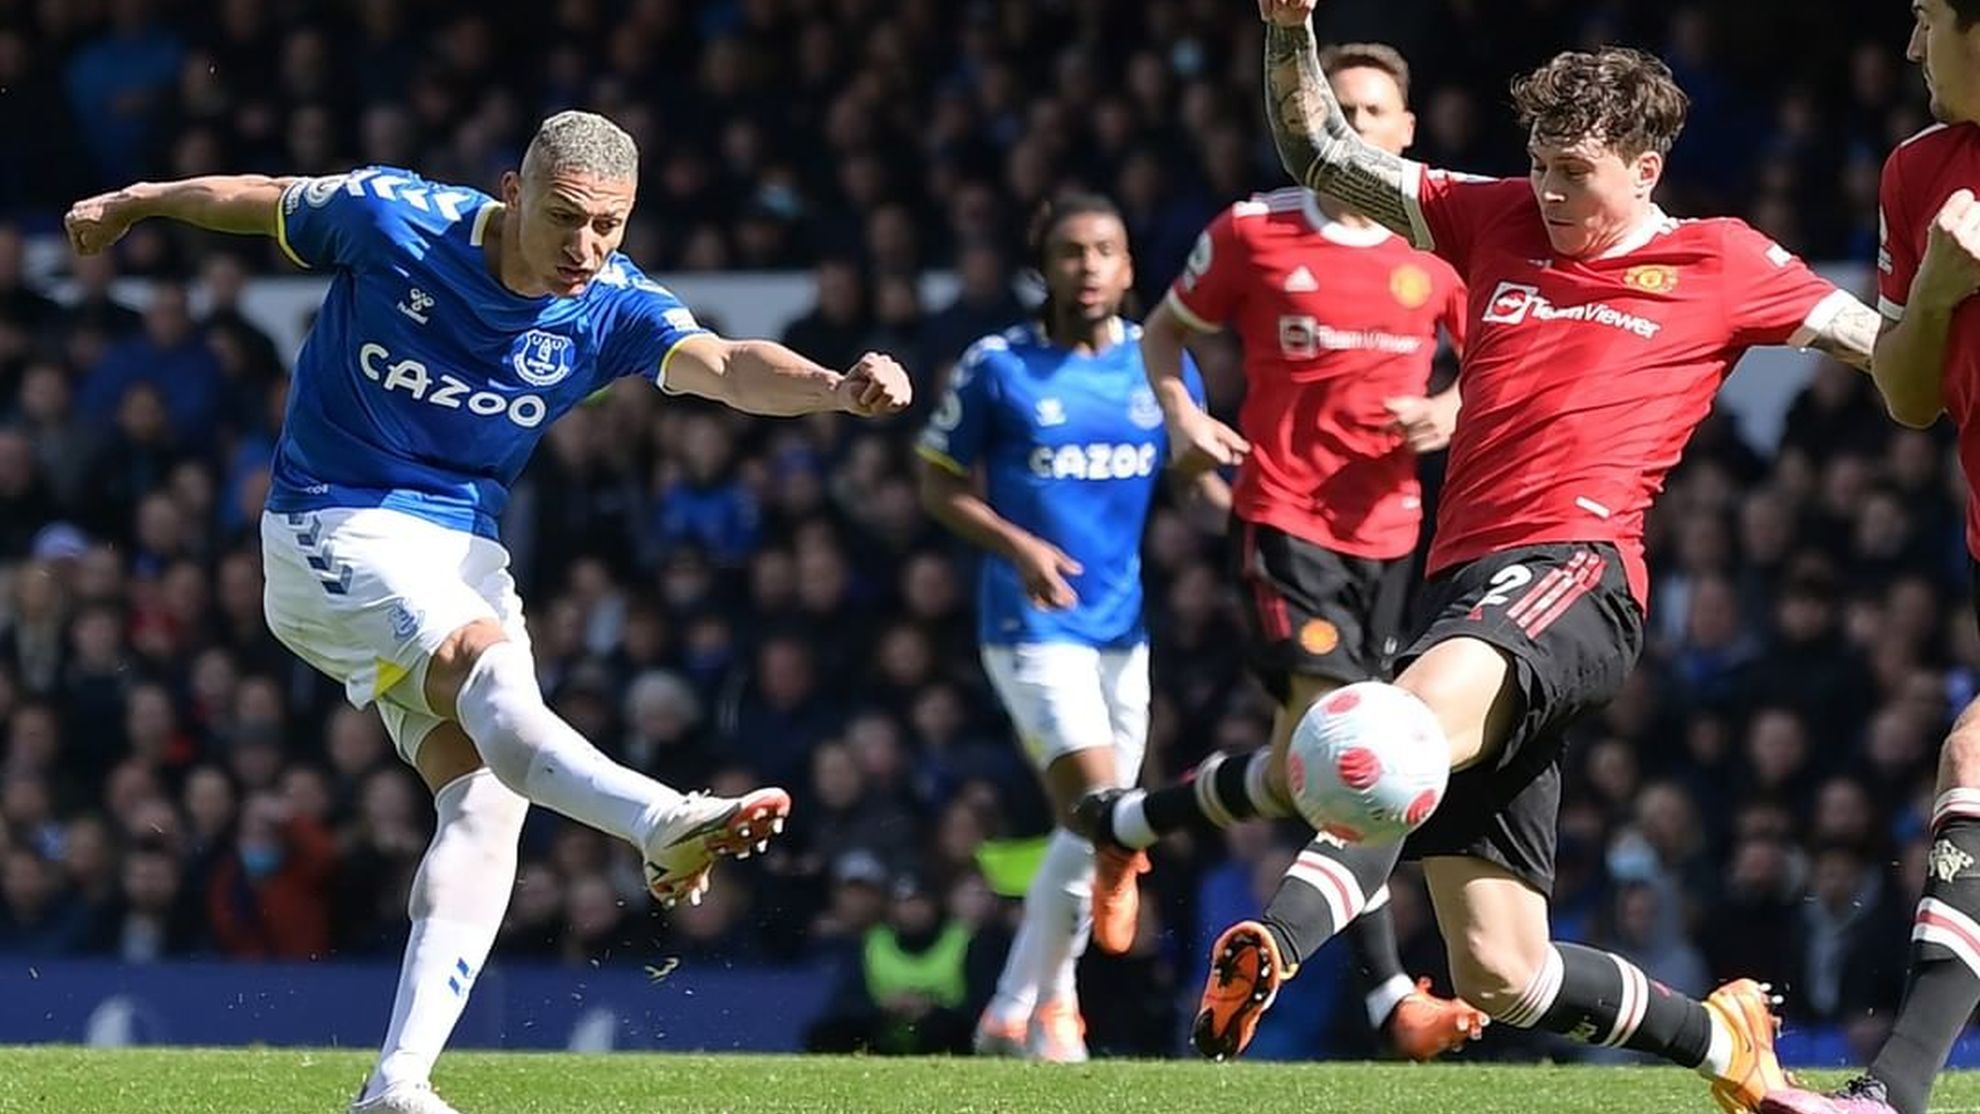 Everton defeat Manchester United 1-0